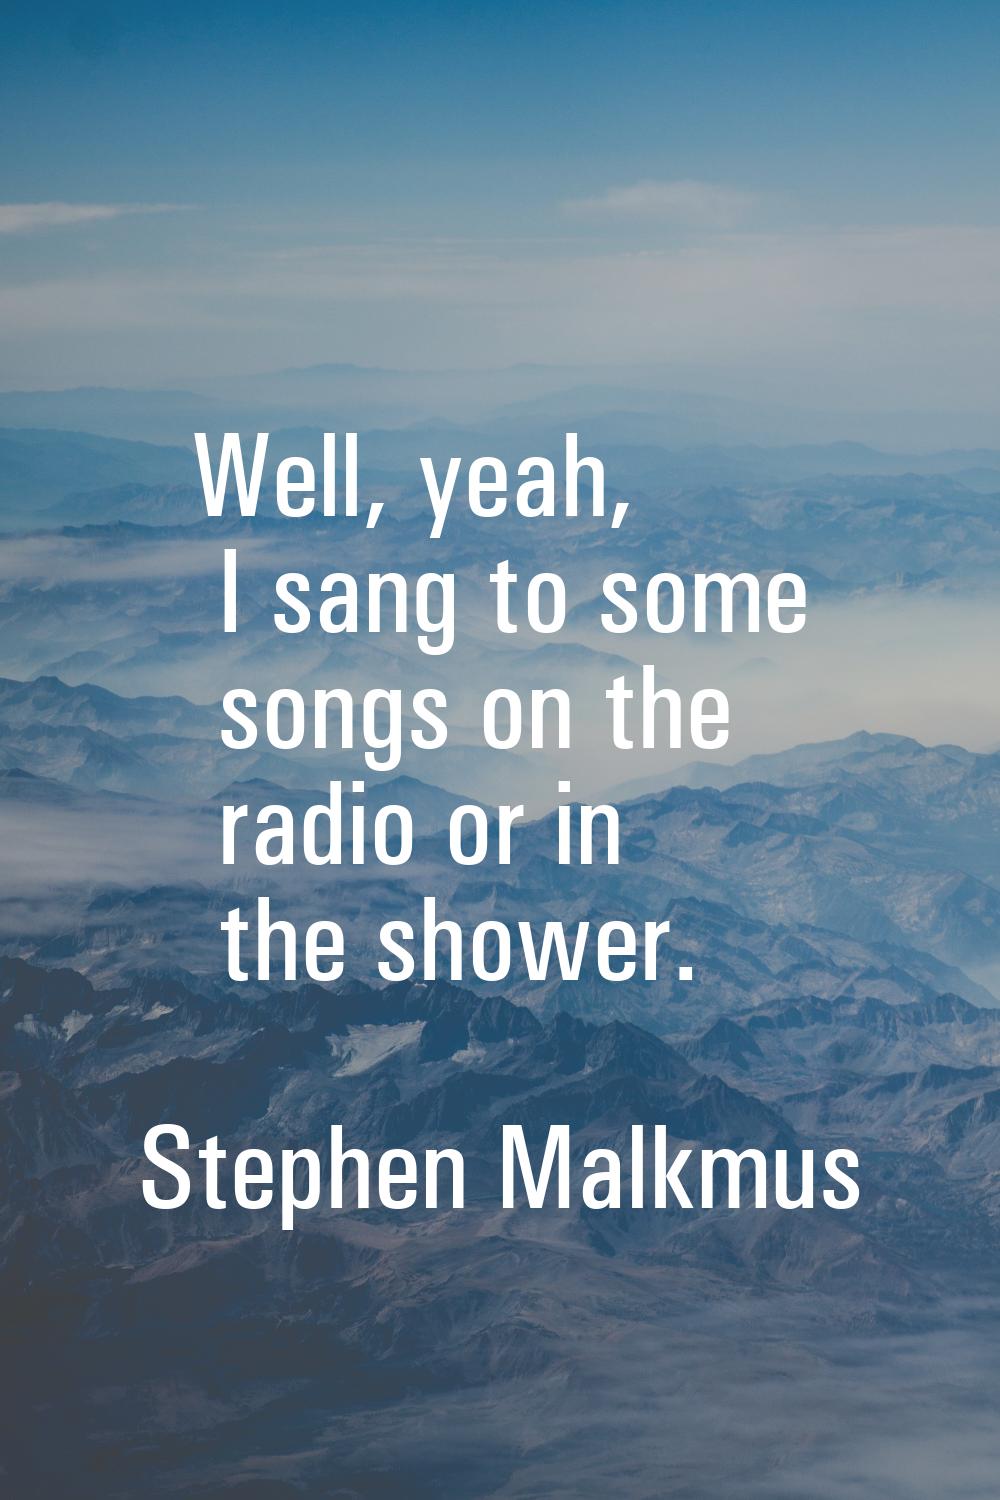 Well, yeah, I sang to some songs on the radio or in the shower.